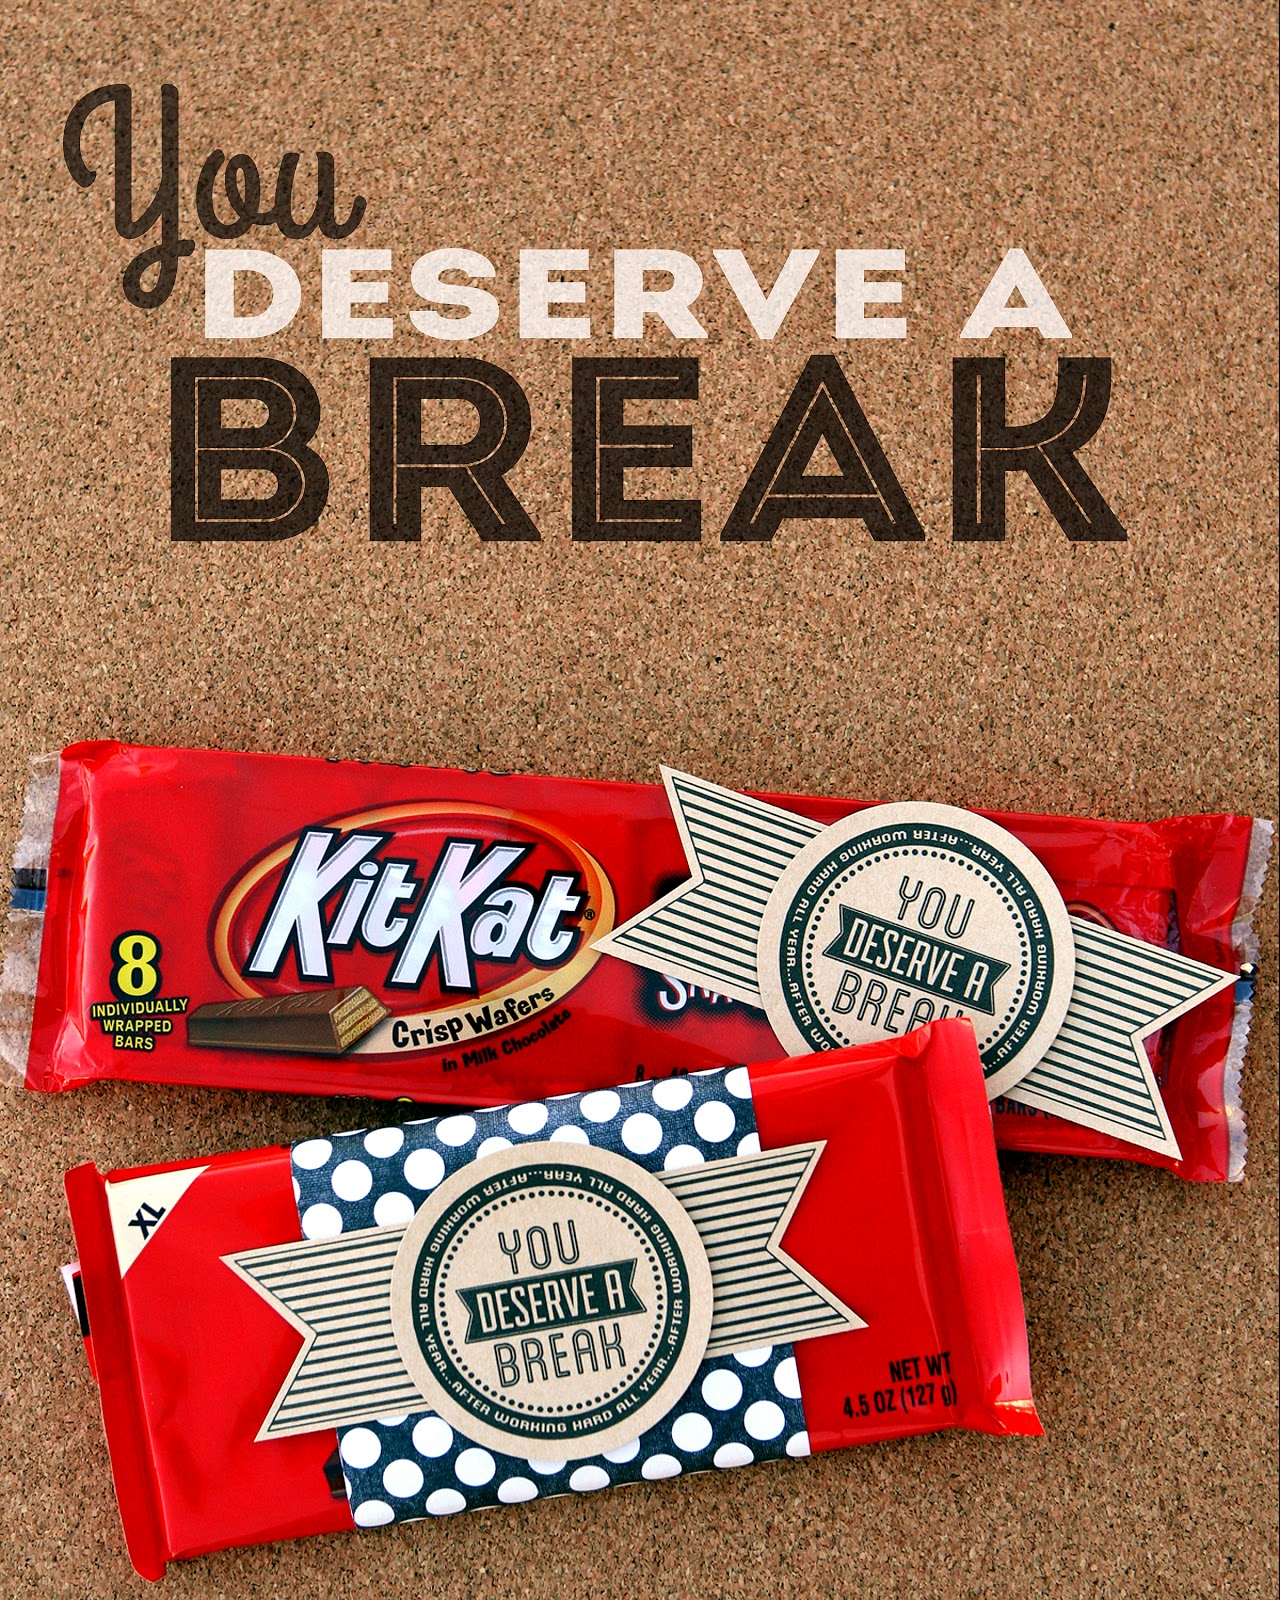 thanksgiving-candy-bar-wrappers-printable-you-deserve-a-break-kit-kat-pretty-party-crafty